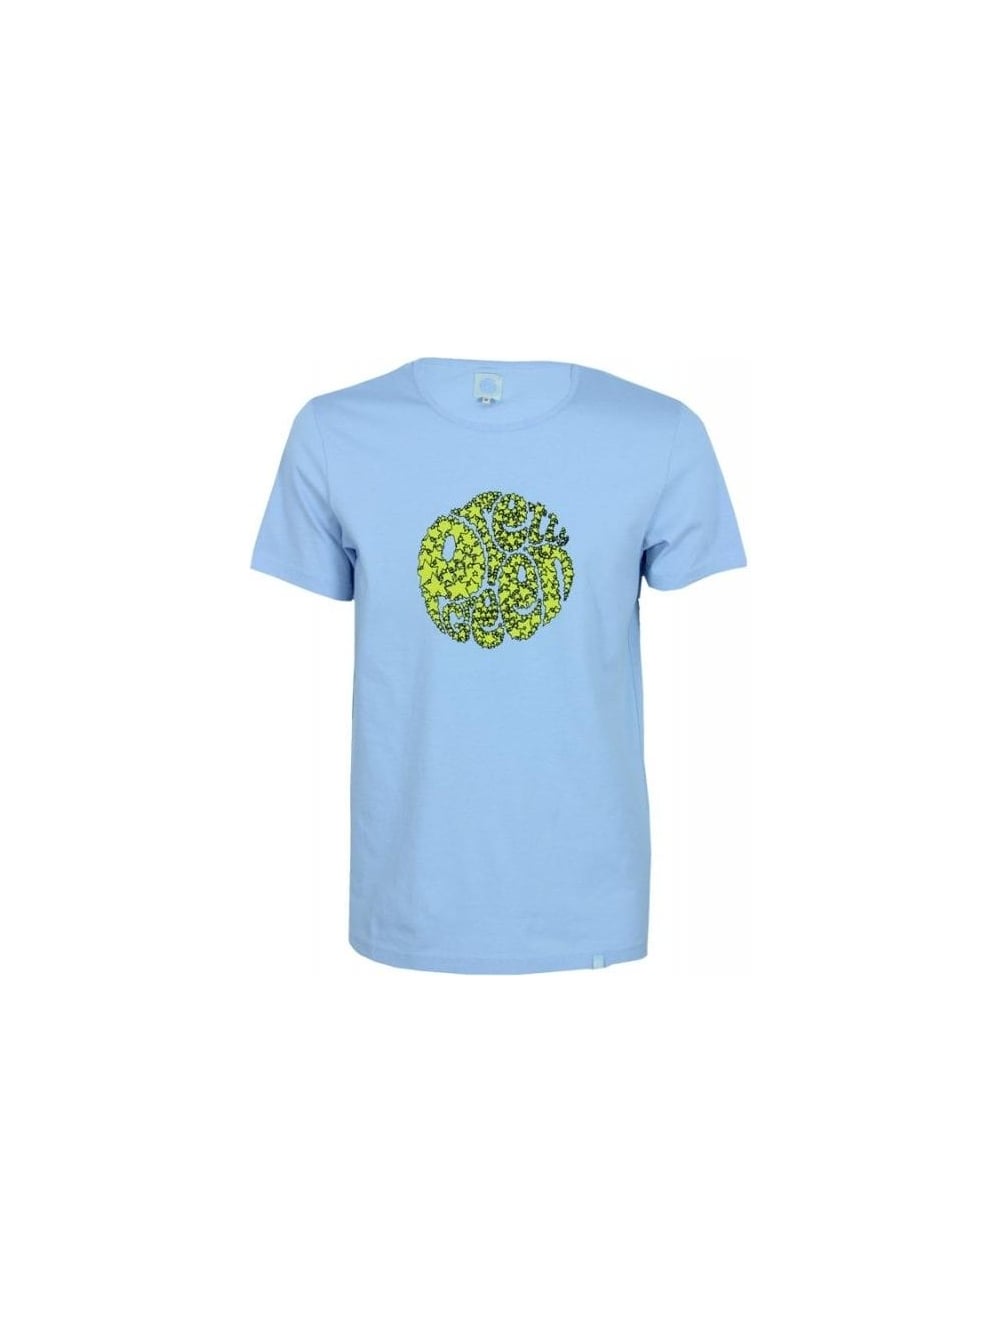 Blue Green with White Star Logo - Pretty Green Star Logo Print T Shirt in Washed Blue - Northern Threads